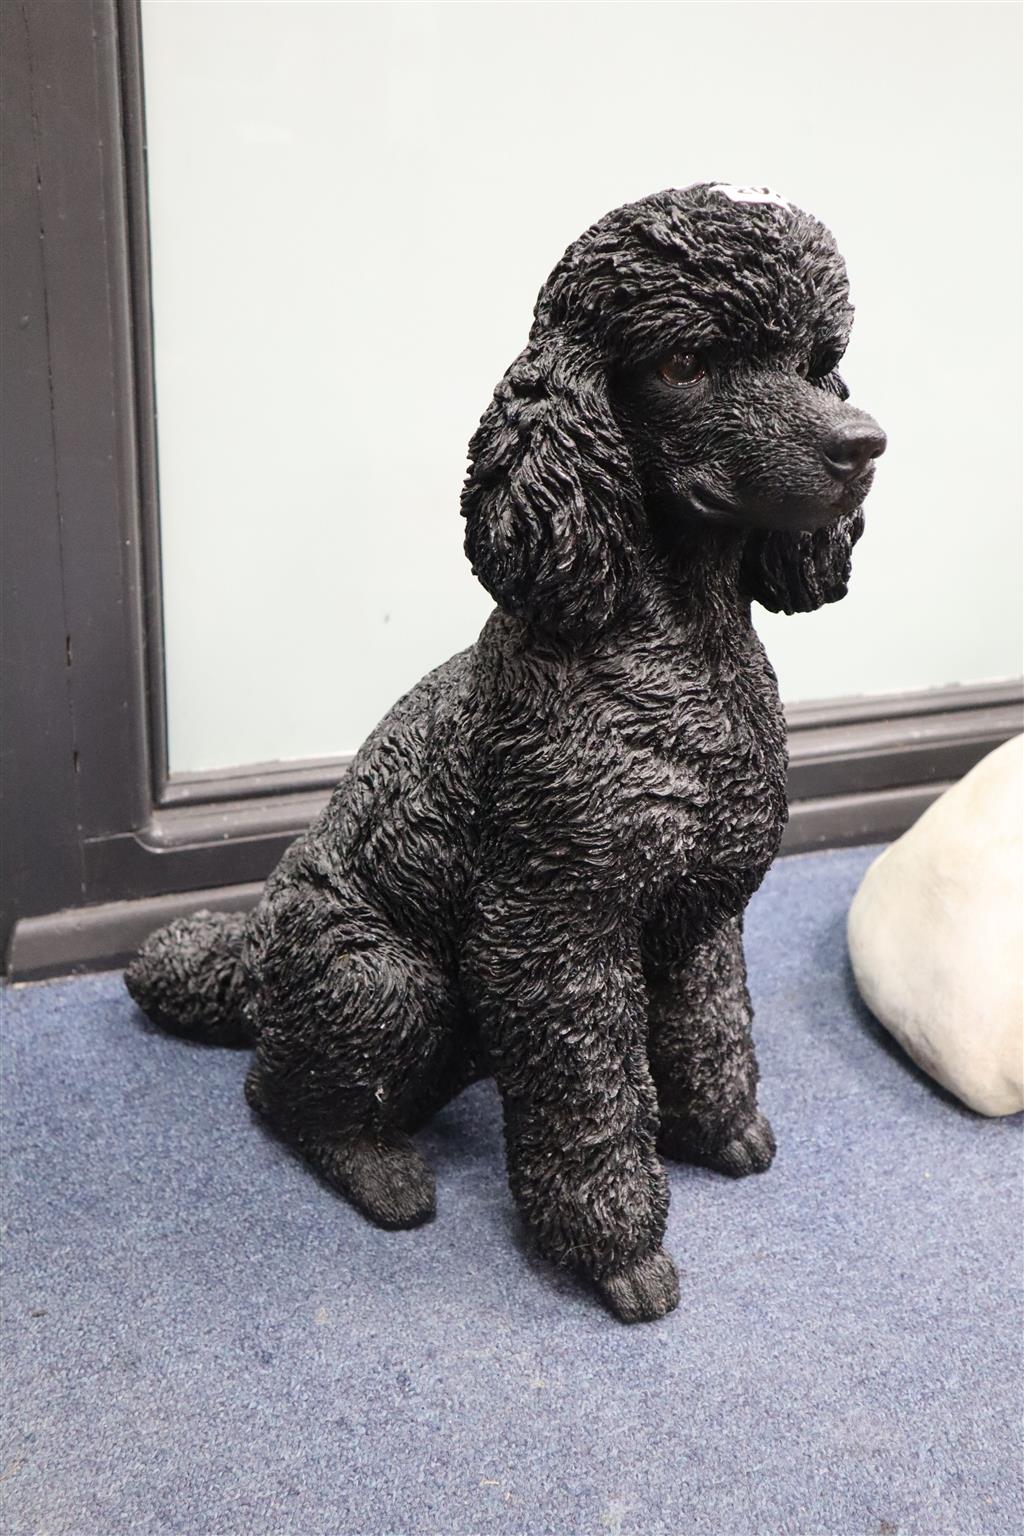 A resin model of a black poodle, height 47cm